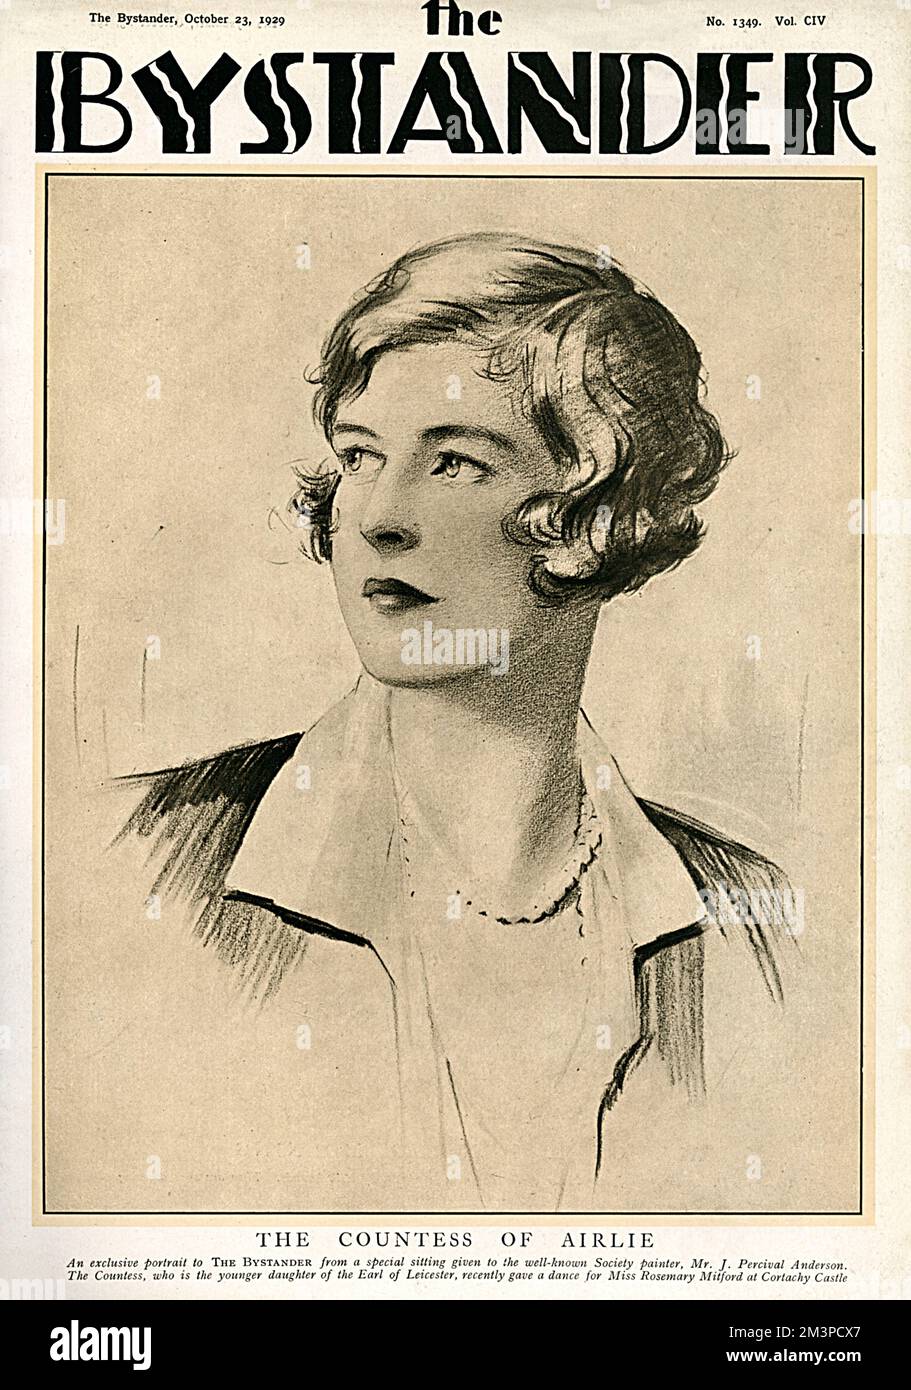 The Countess of Airlie, formerly Lady Alexandra Marie Bridget Coke, daughter of the 3rd Earl of Leicester.  Married David Ogilvy, 7th Earl of Airlie in 1917 and had six children including the Rt. Hon. Angus Ogilvy, husband of Princess Alexandra of Kent.  She is featured in a portrait by society painter, J. Percival Anderson and the magazine reports that she recently gave a dance for Miss Rosemary Mitford at Cortachy Castle.     Date: 1929 Stock Photo